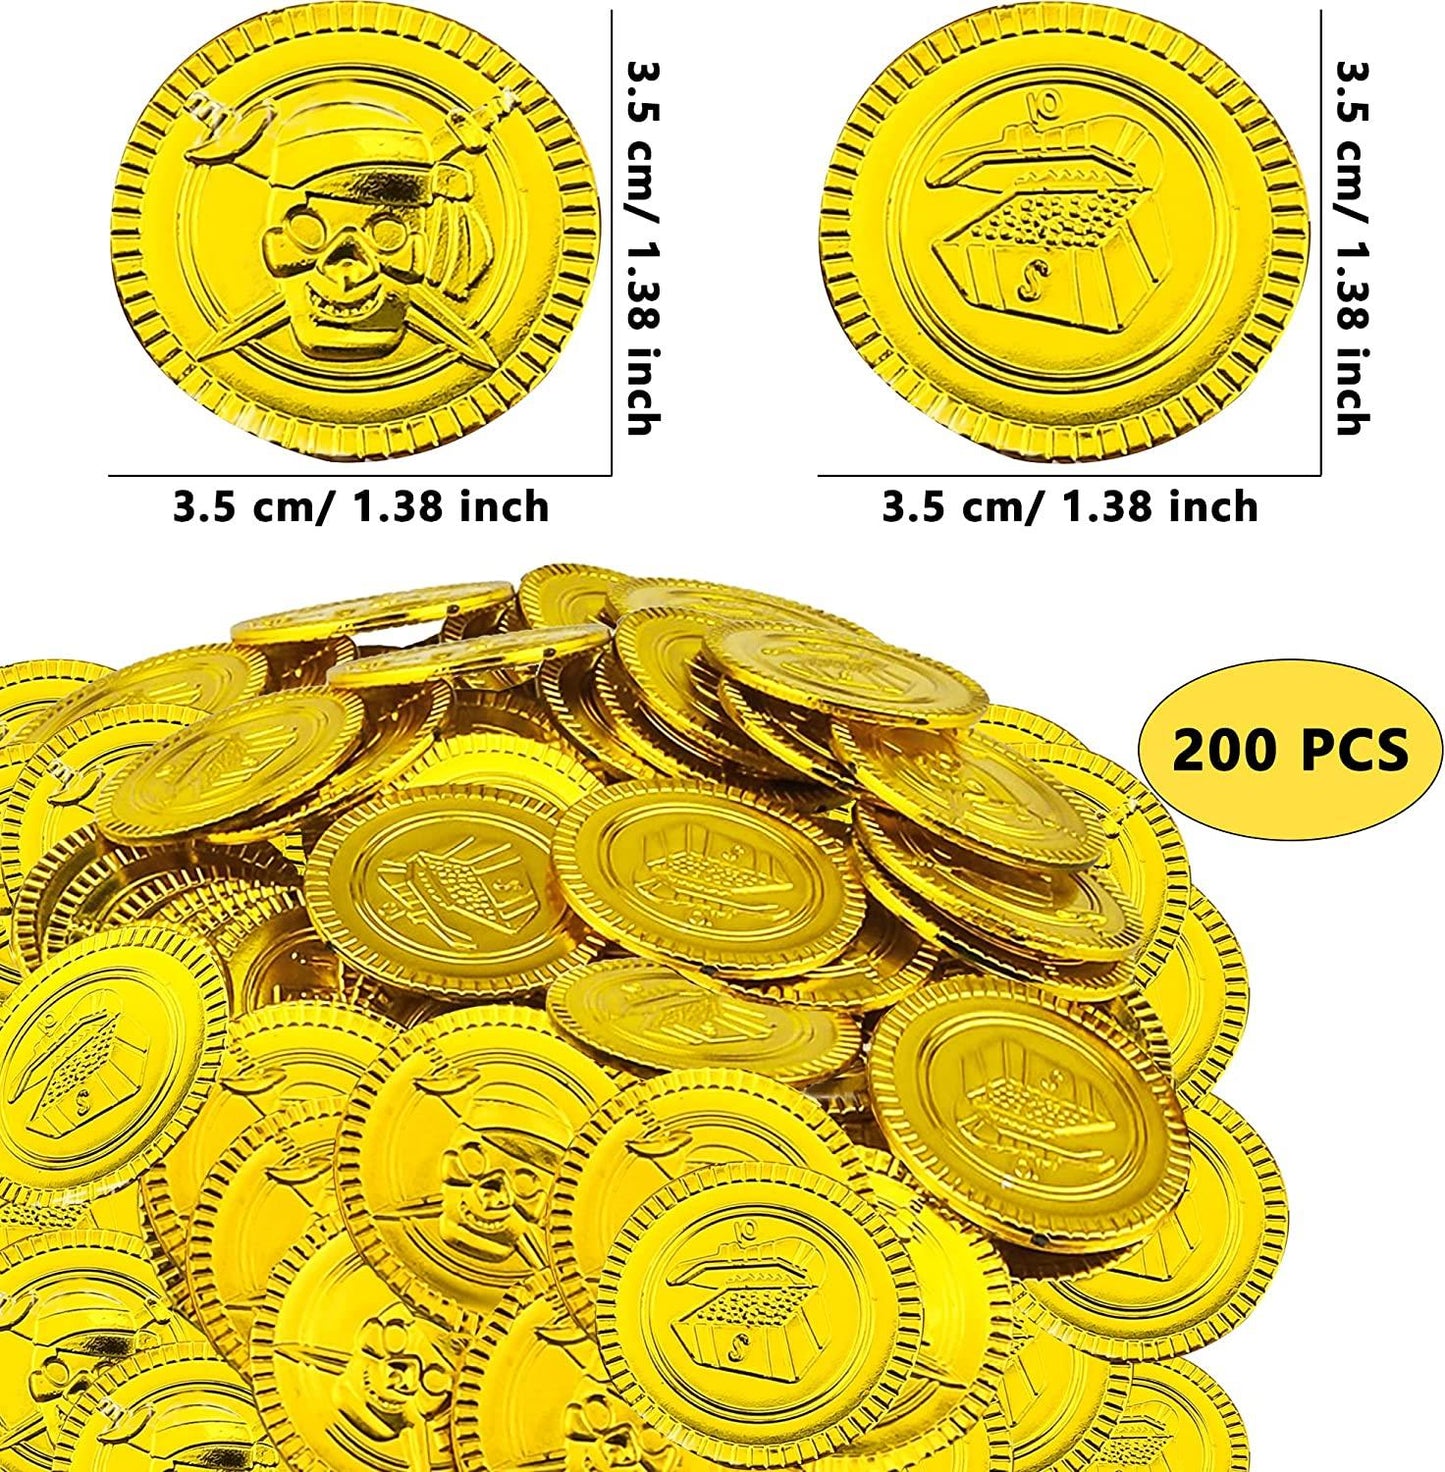 100 x Novelty Gold Coins - Pirate Party Jewelry Fancy Dress Treasure Prop Favor Toy